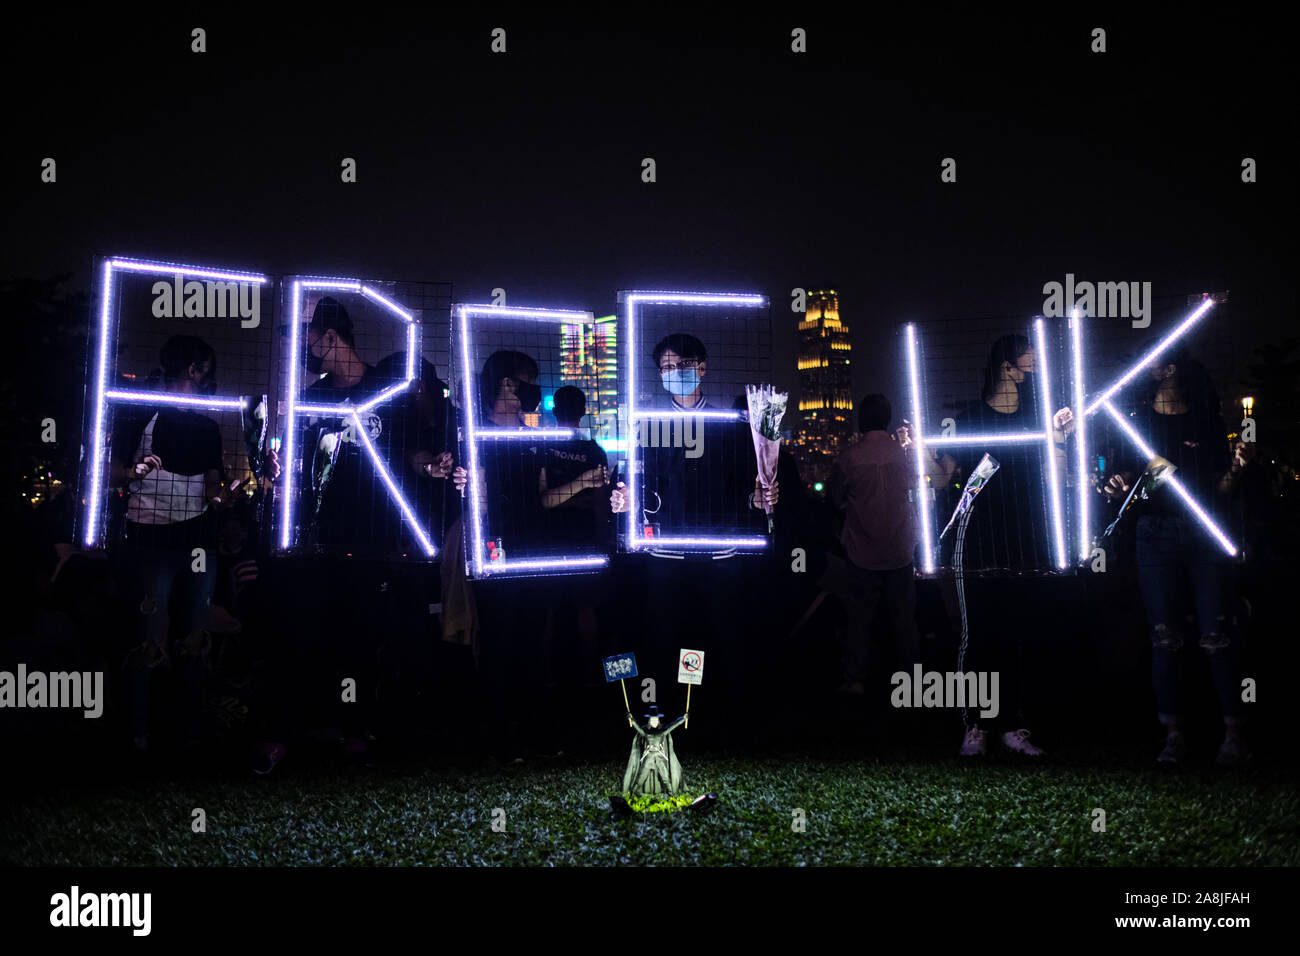 Hong Kong, China. 9th Nov, 2019. A Free HK sign is seen during a memorial rally at Tamar Park in Hong Kong to mourn the death of a 22 years old university student Alex Chow Tsz Lok, who died from a serious brain injury during a fall on November 4th as police skirmished with demonstrators last weekend. He was left in critical condition and died after suffering a cardiac arrest on Friday. Credit: Keith Tsuji/ZUMA Wire/Alamy Live News Stock Photo